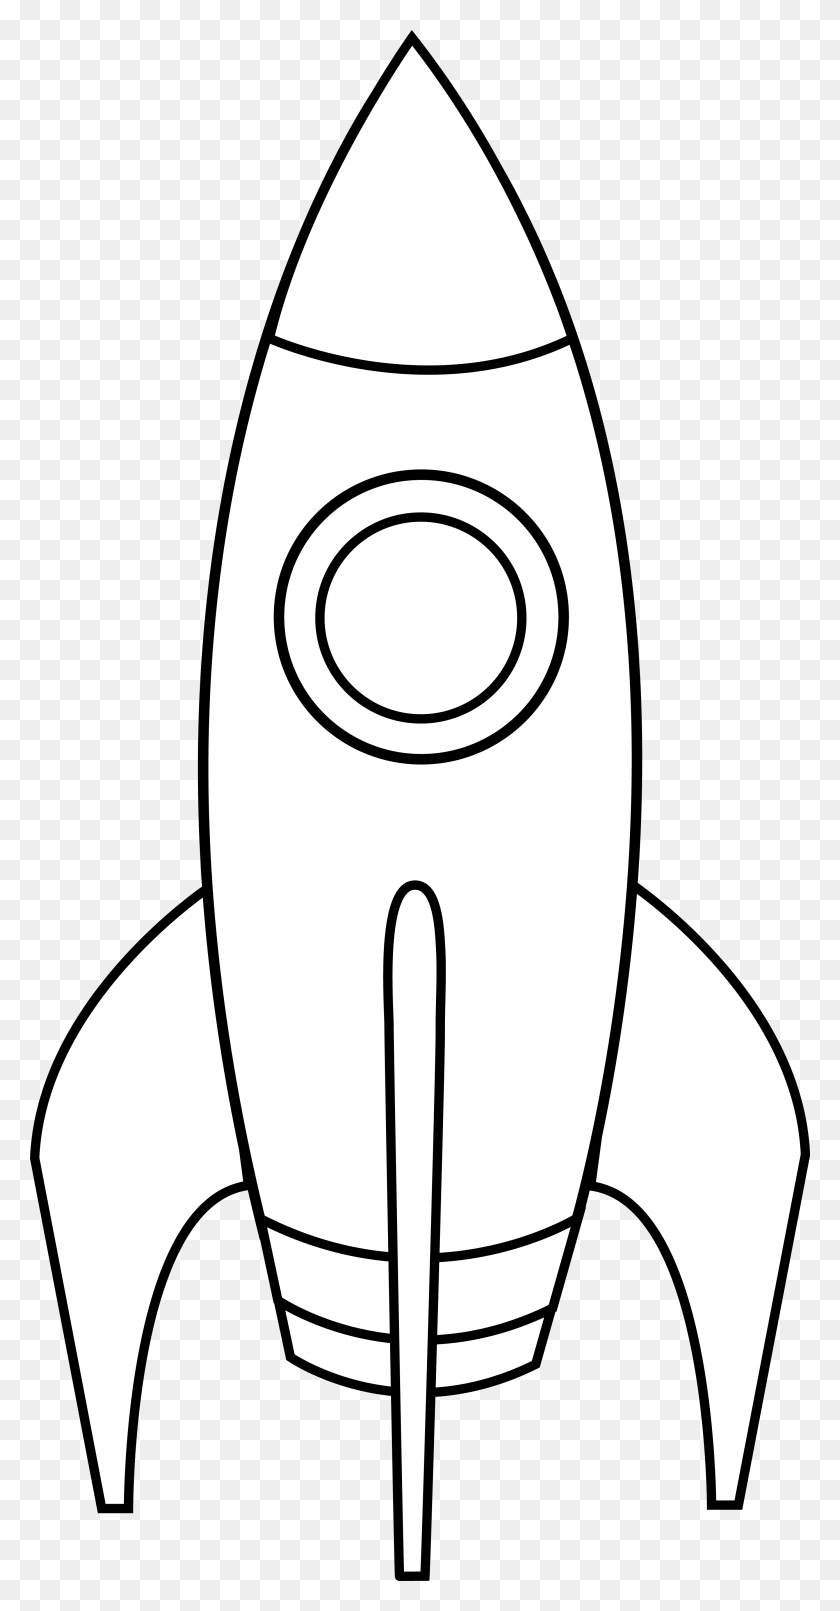 2778x5526 Free Images Of Spaceship - Rocket Ship Clipart